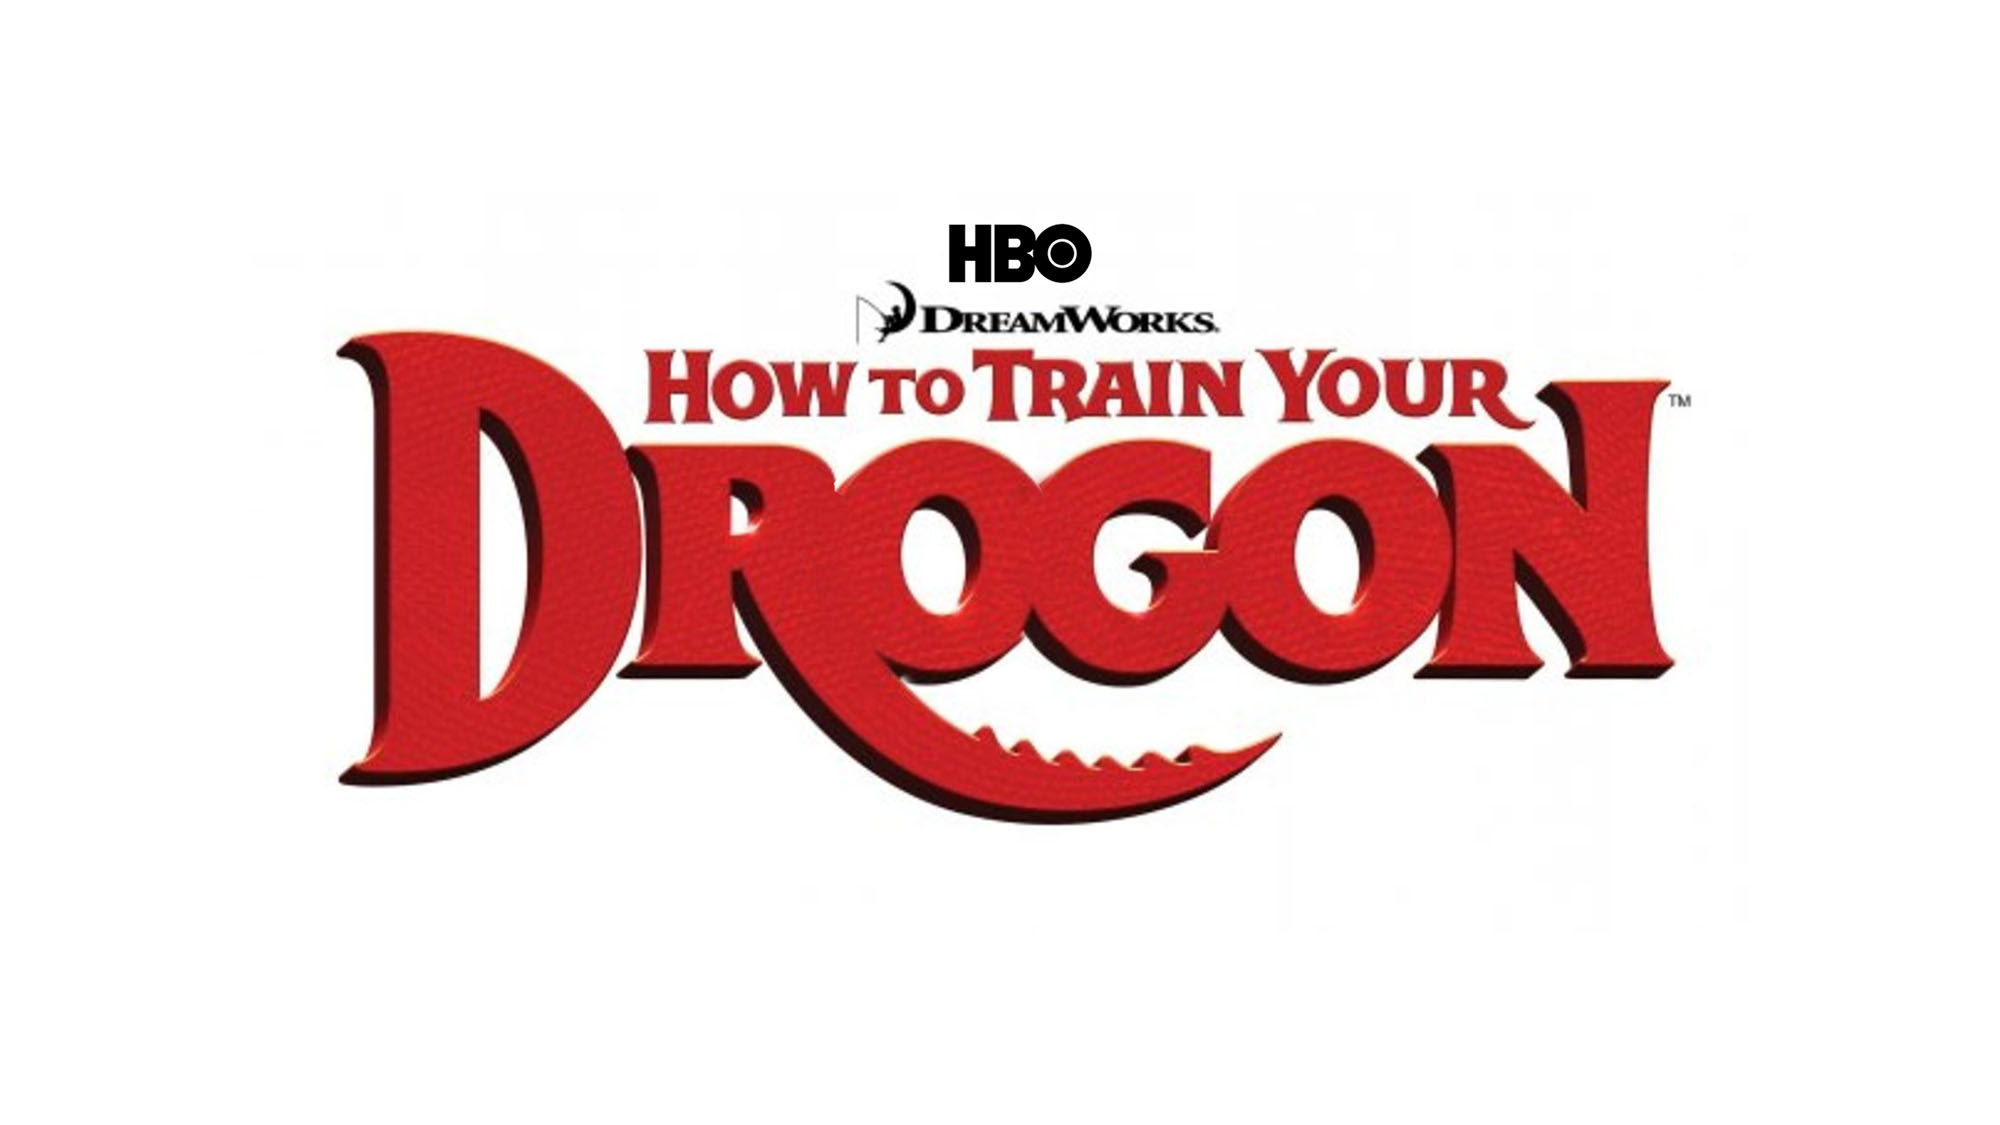 How to train your Drogon